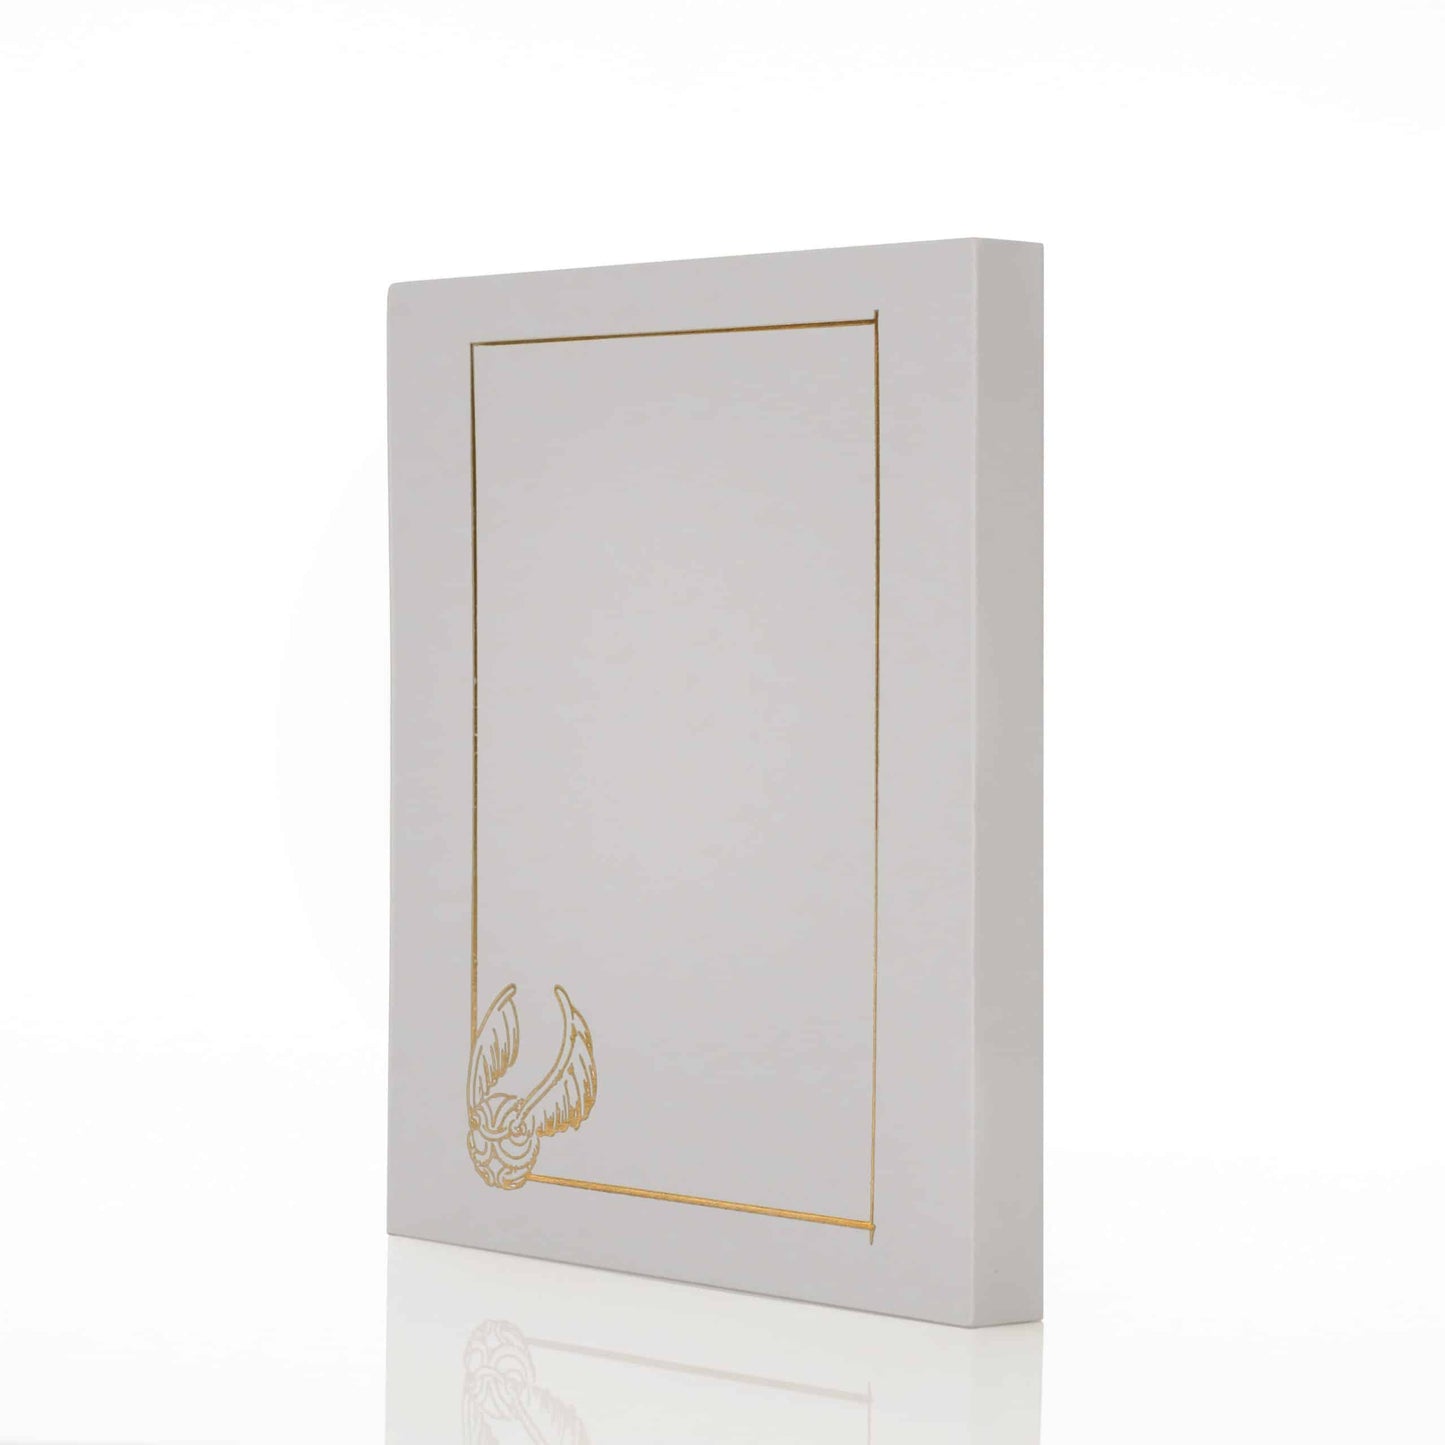 Harry Potter Little Keeper Baby Album (Non-Retail Packaging)